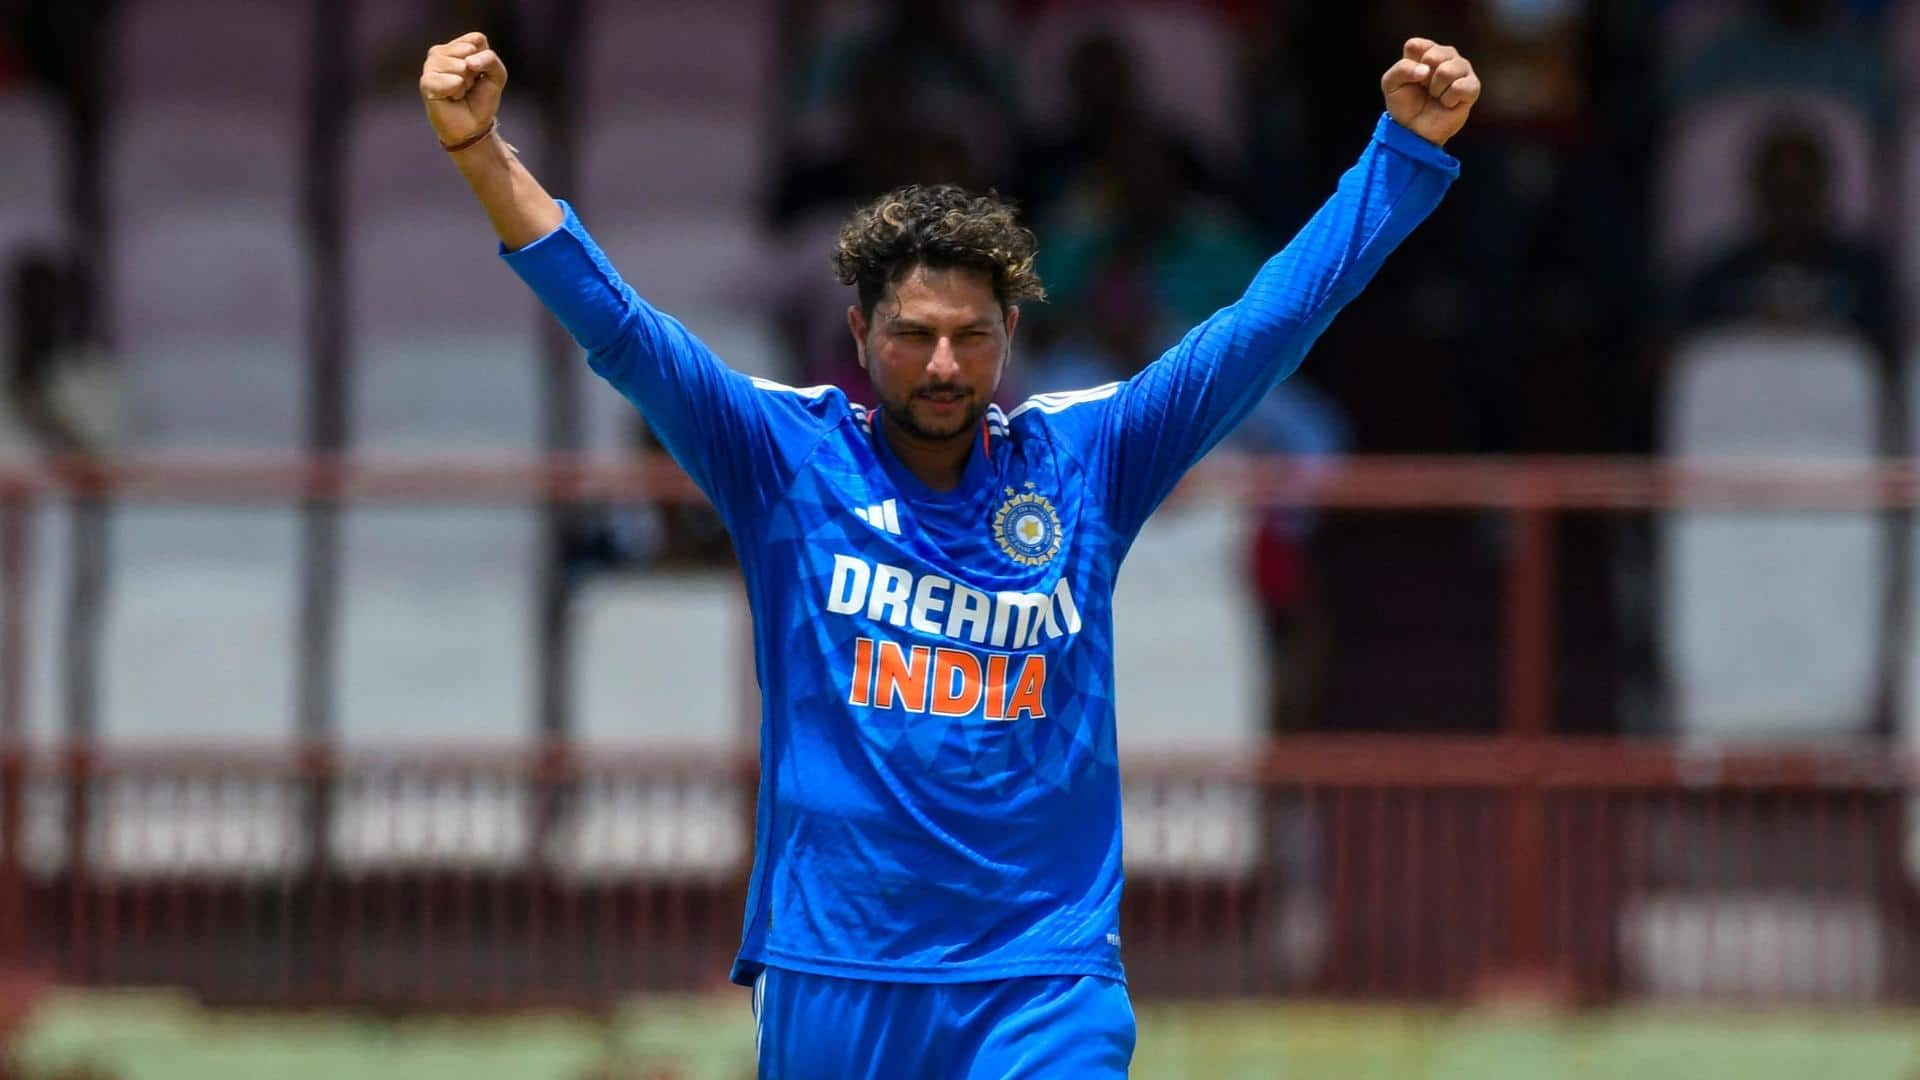 Kuldeep Yadav becomes fastest Indian to 50 T20I wickets: Stats